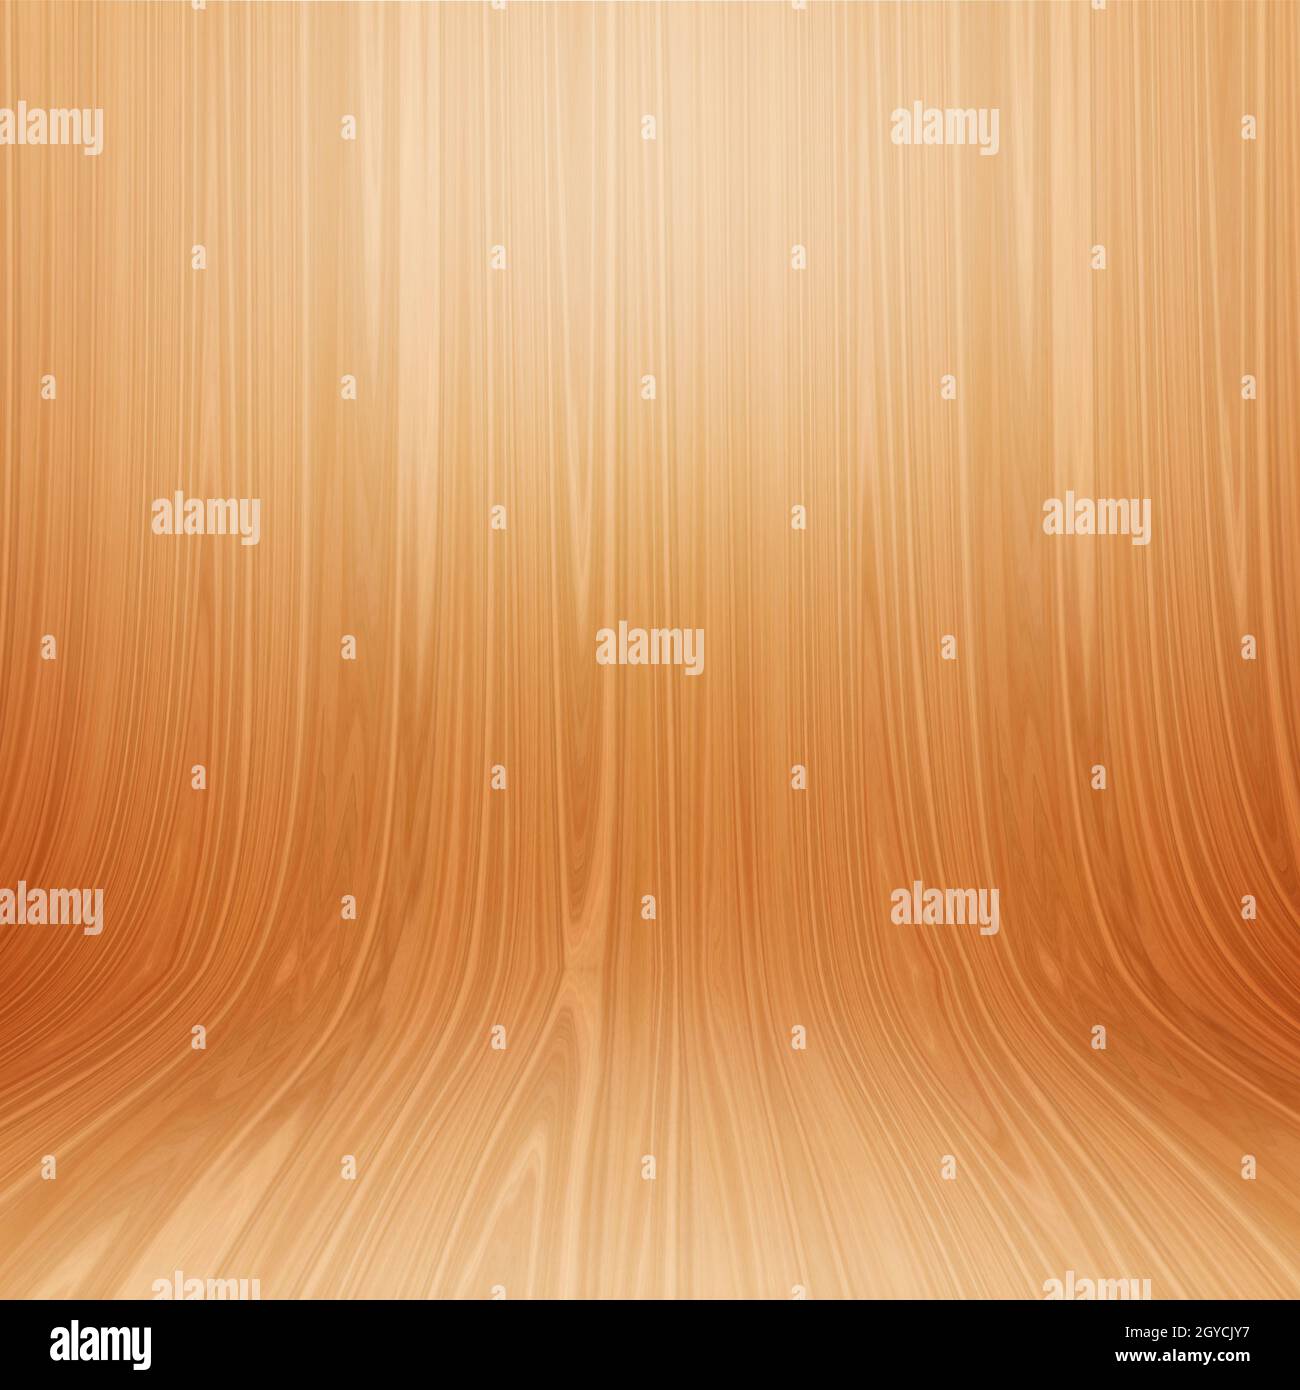 Curved wood presentation background with soft spot lights Stock Photo